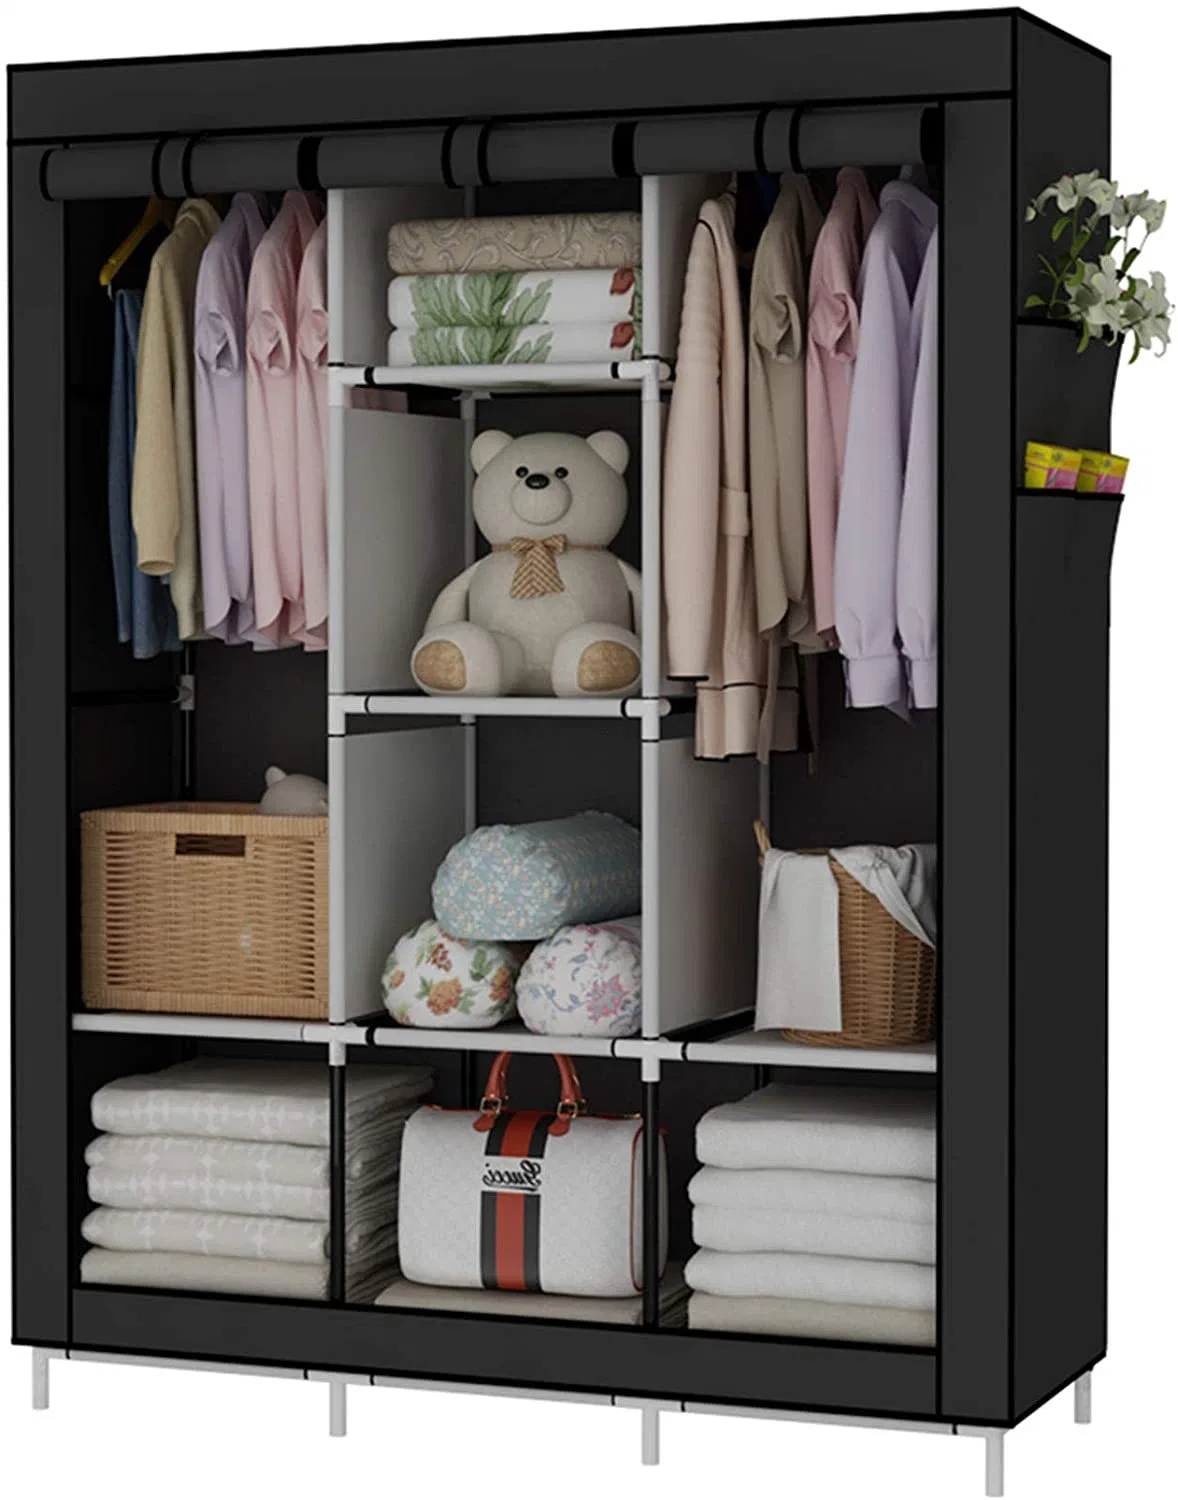 Chinese Wholesale Hot Sale Product DIY Fabric Wardrobe Cabinet Kids Adult Living Room Wardrobe